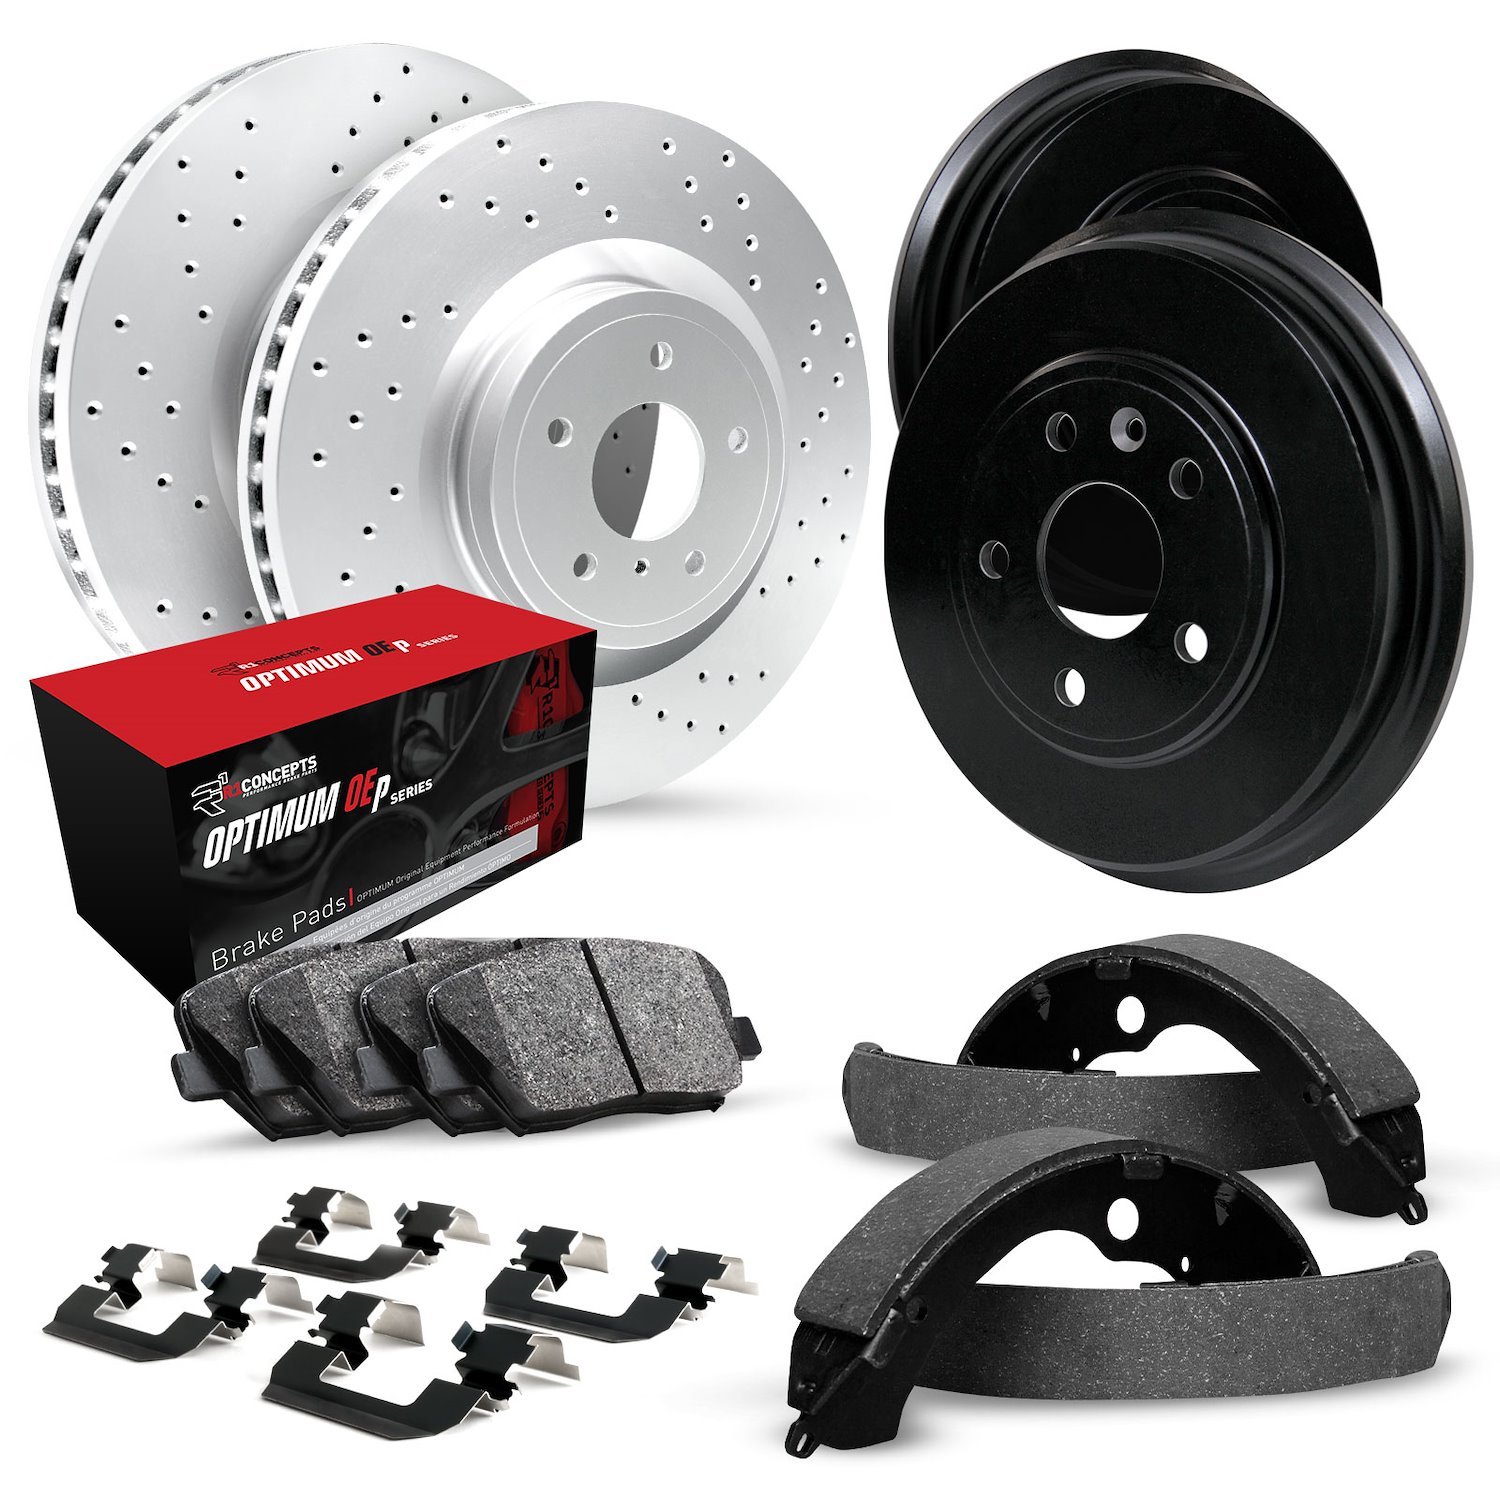 GEO-Carbon Drilled Brake Rotor & Drum Set w/Optimum OE Pads, Shoes, & Hardware, 1983-1989 GM, Position: Front & Rear